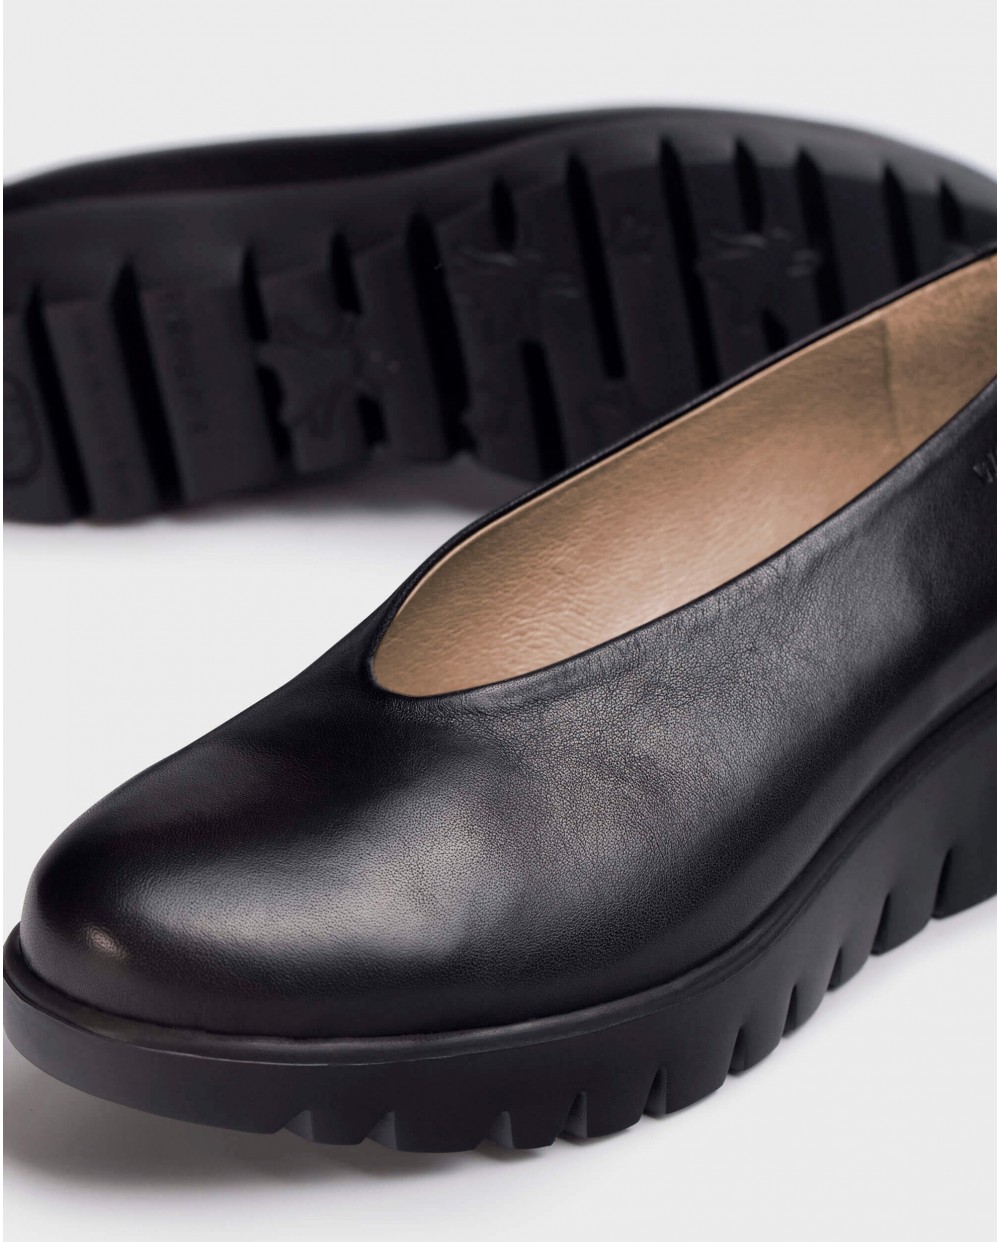 Wonders-Flat Shoes-Black Fly Moccasin